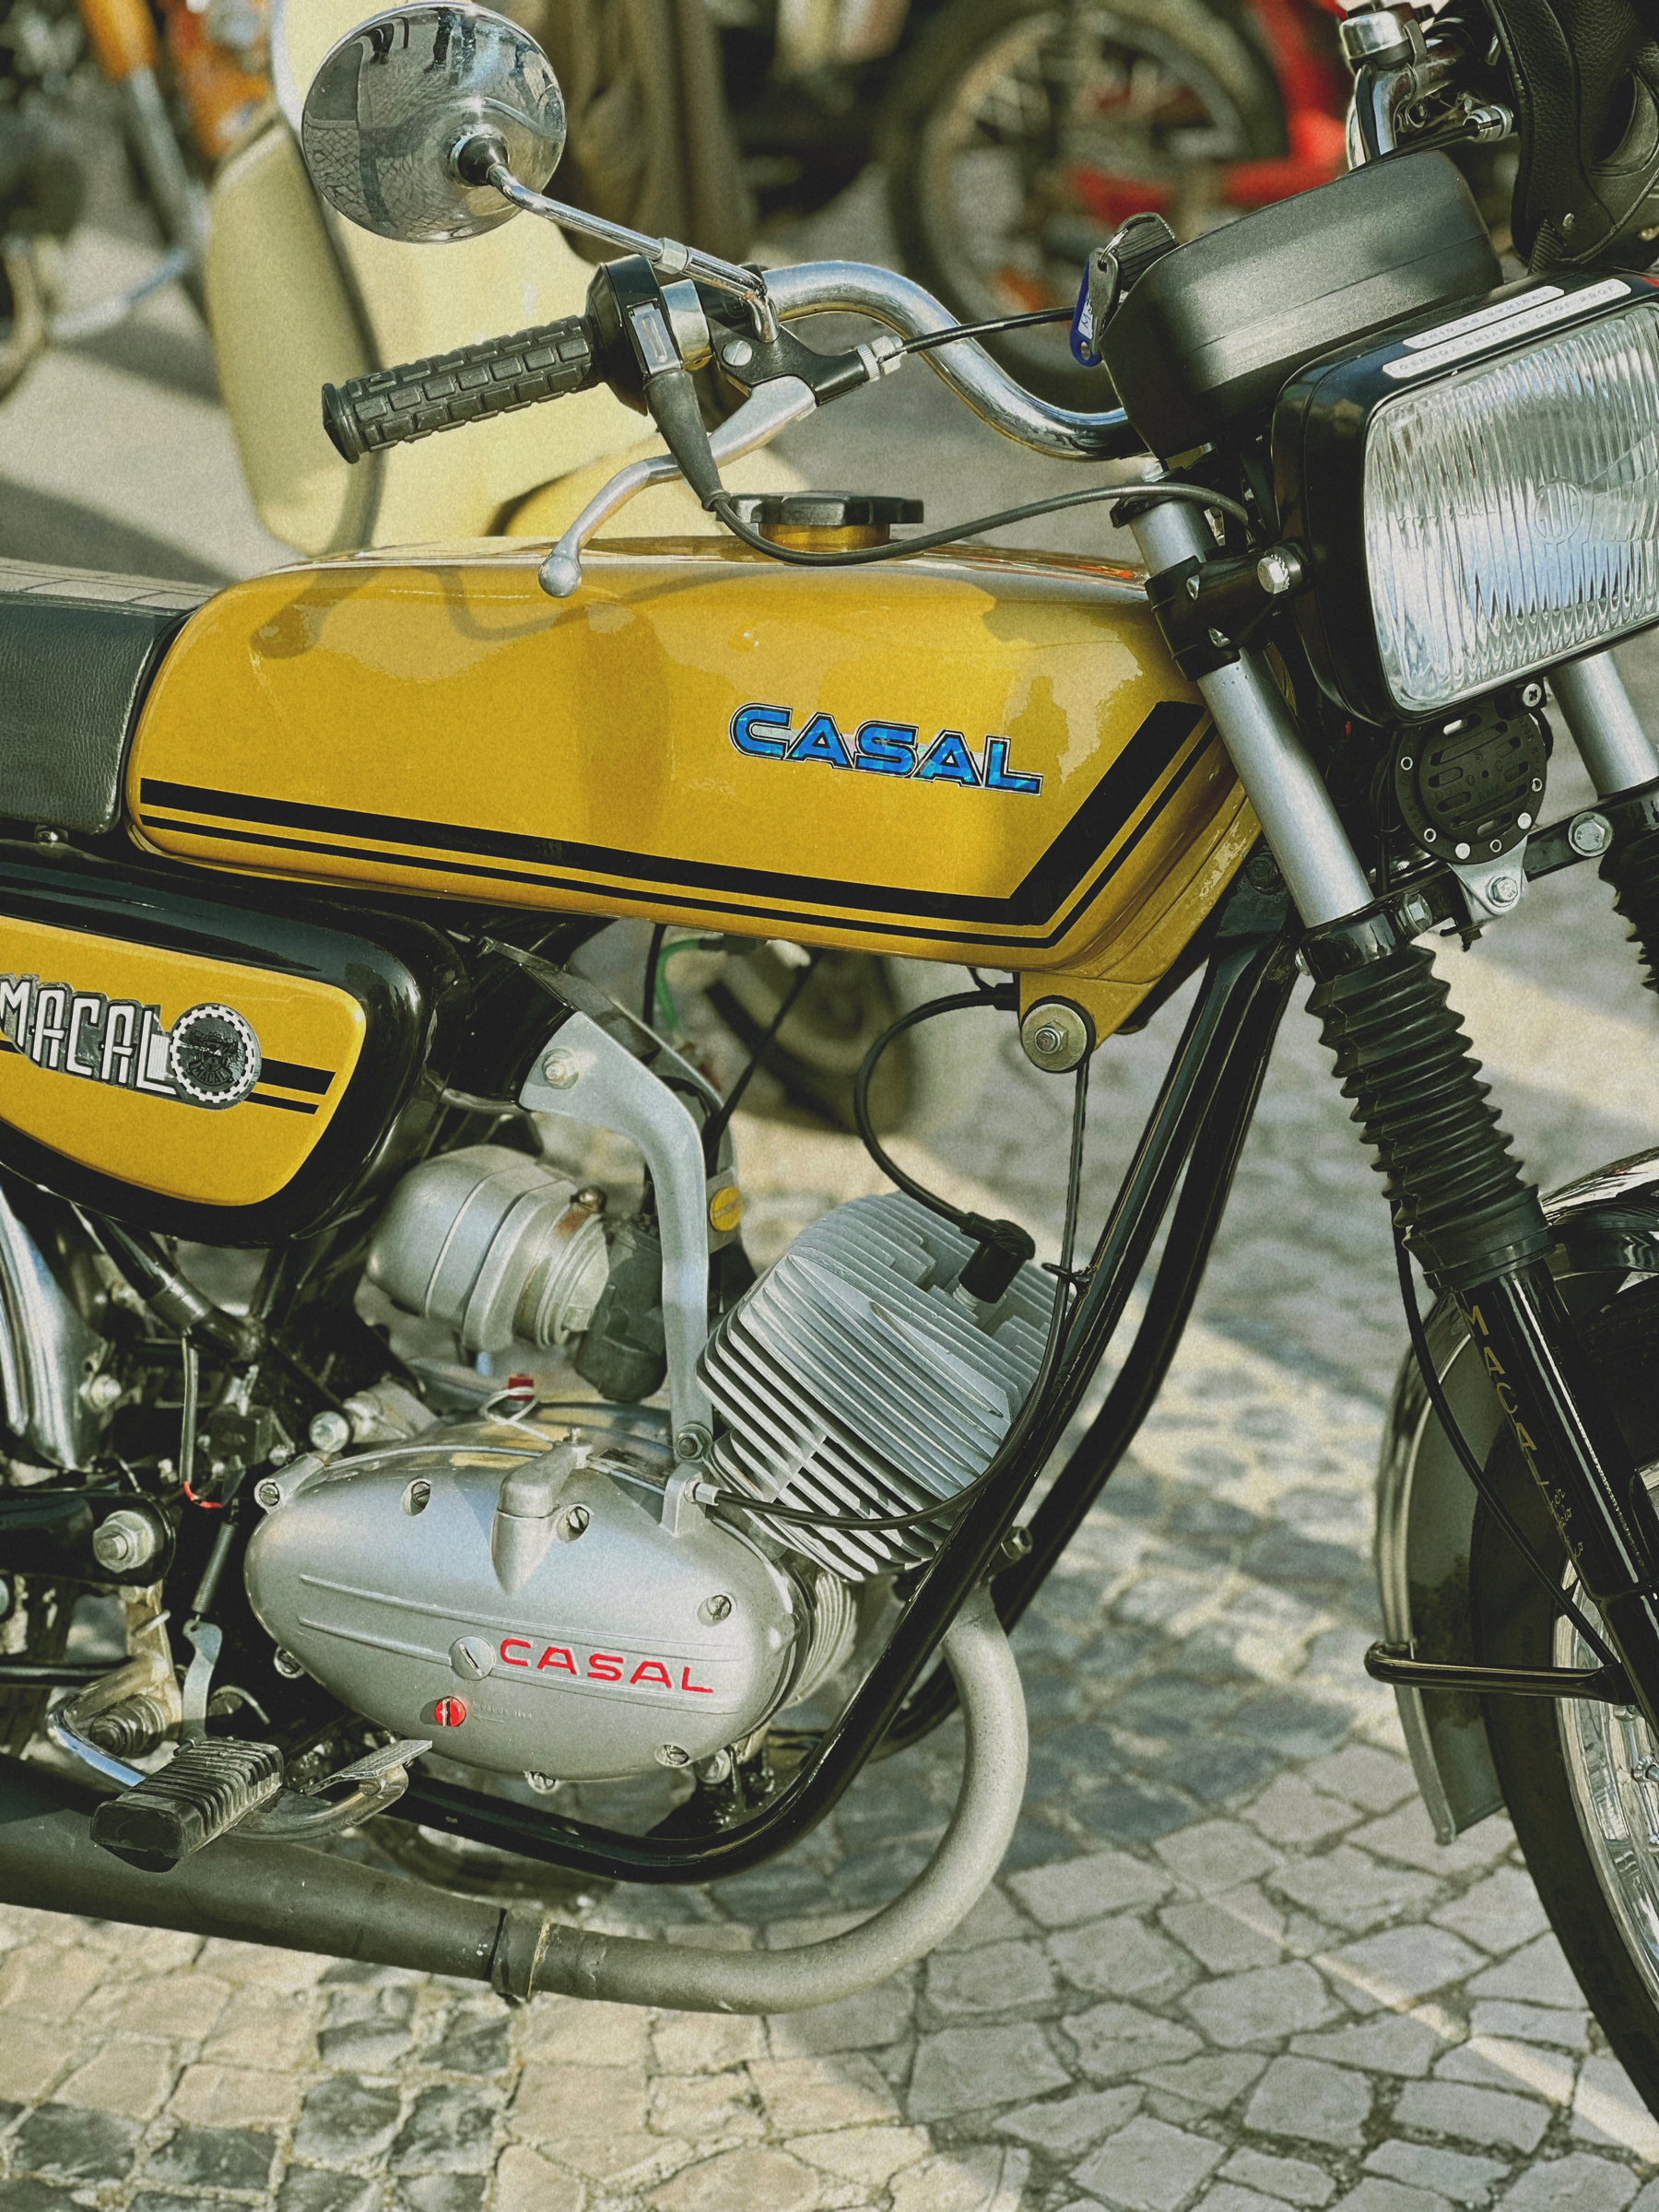 A classic CASAL motorcycle. Gold. 